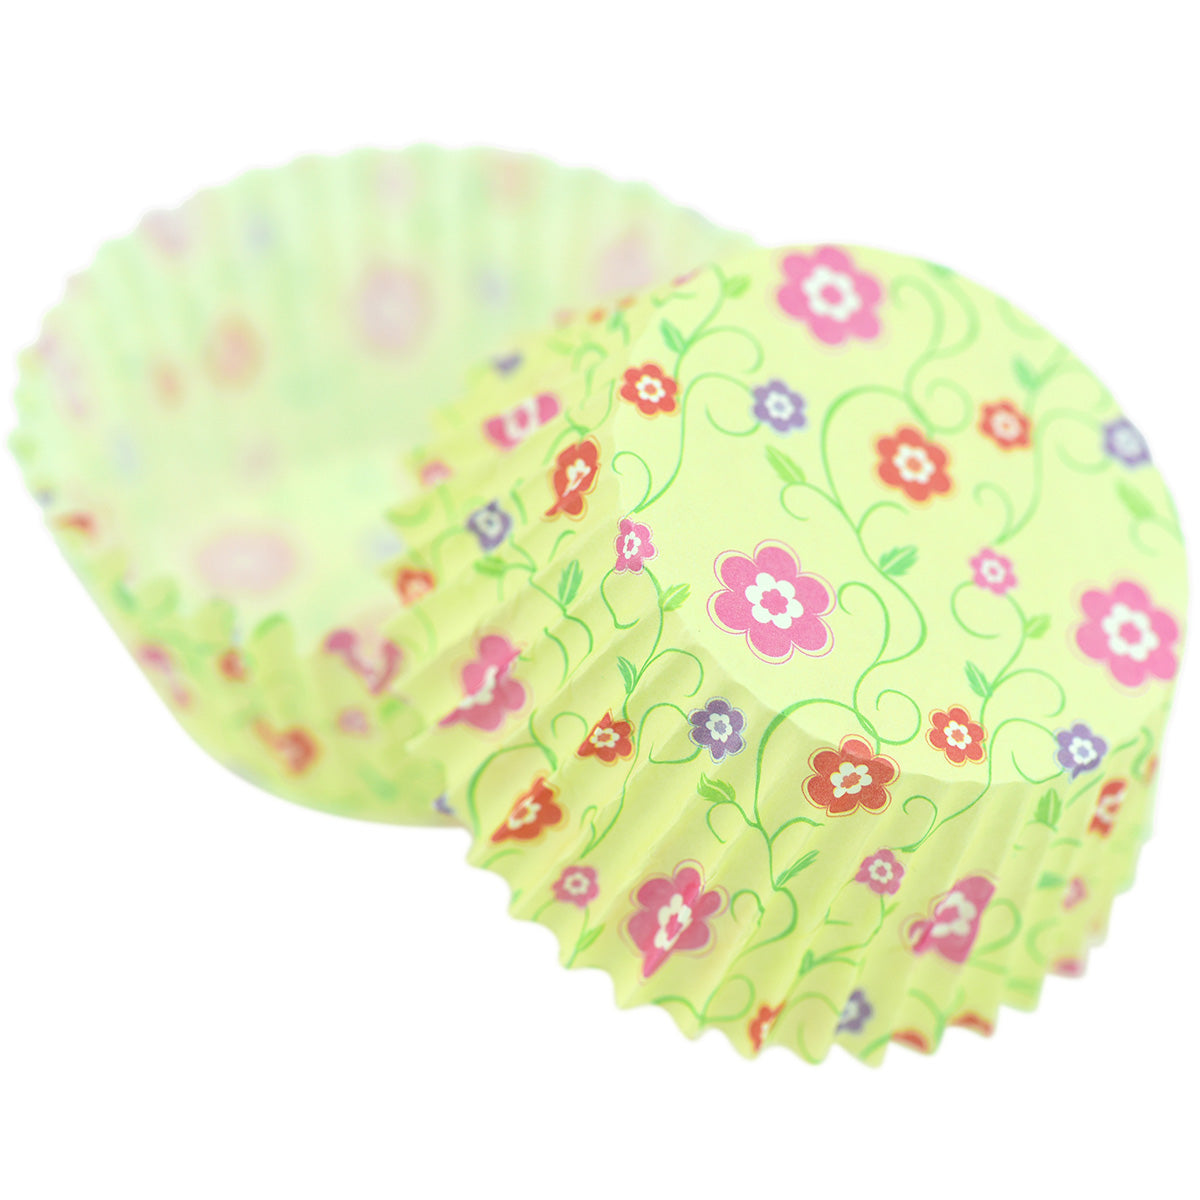 100-Pack Cupcake Muffin Baking Paper Cases Liners Style 39